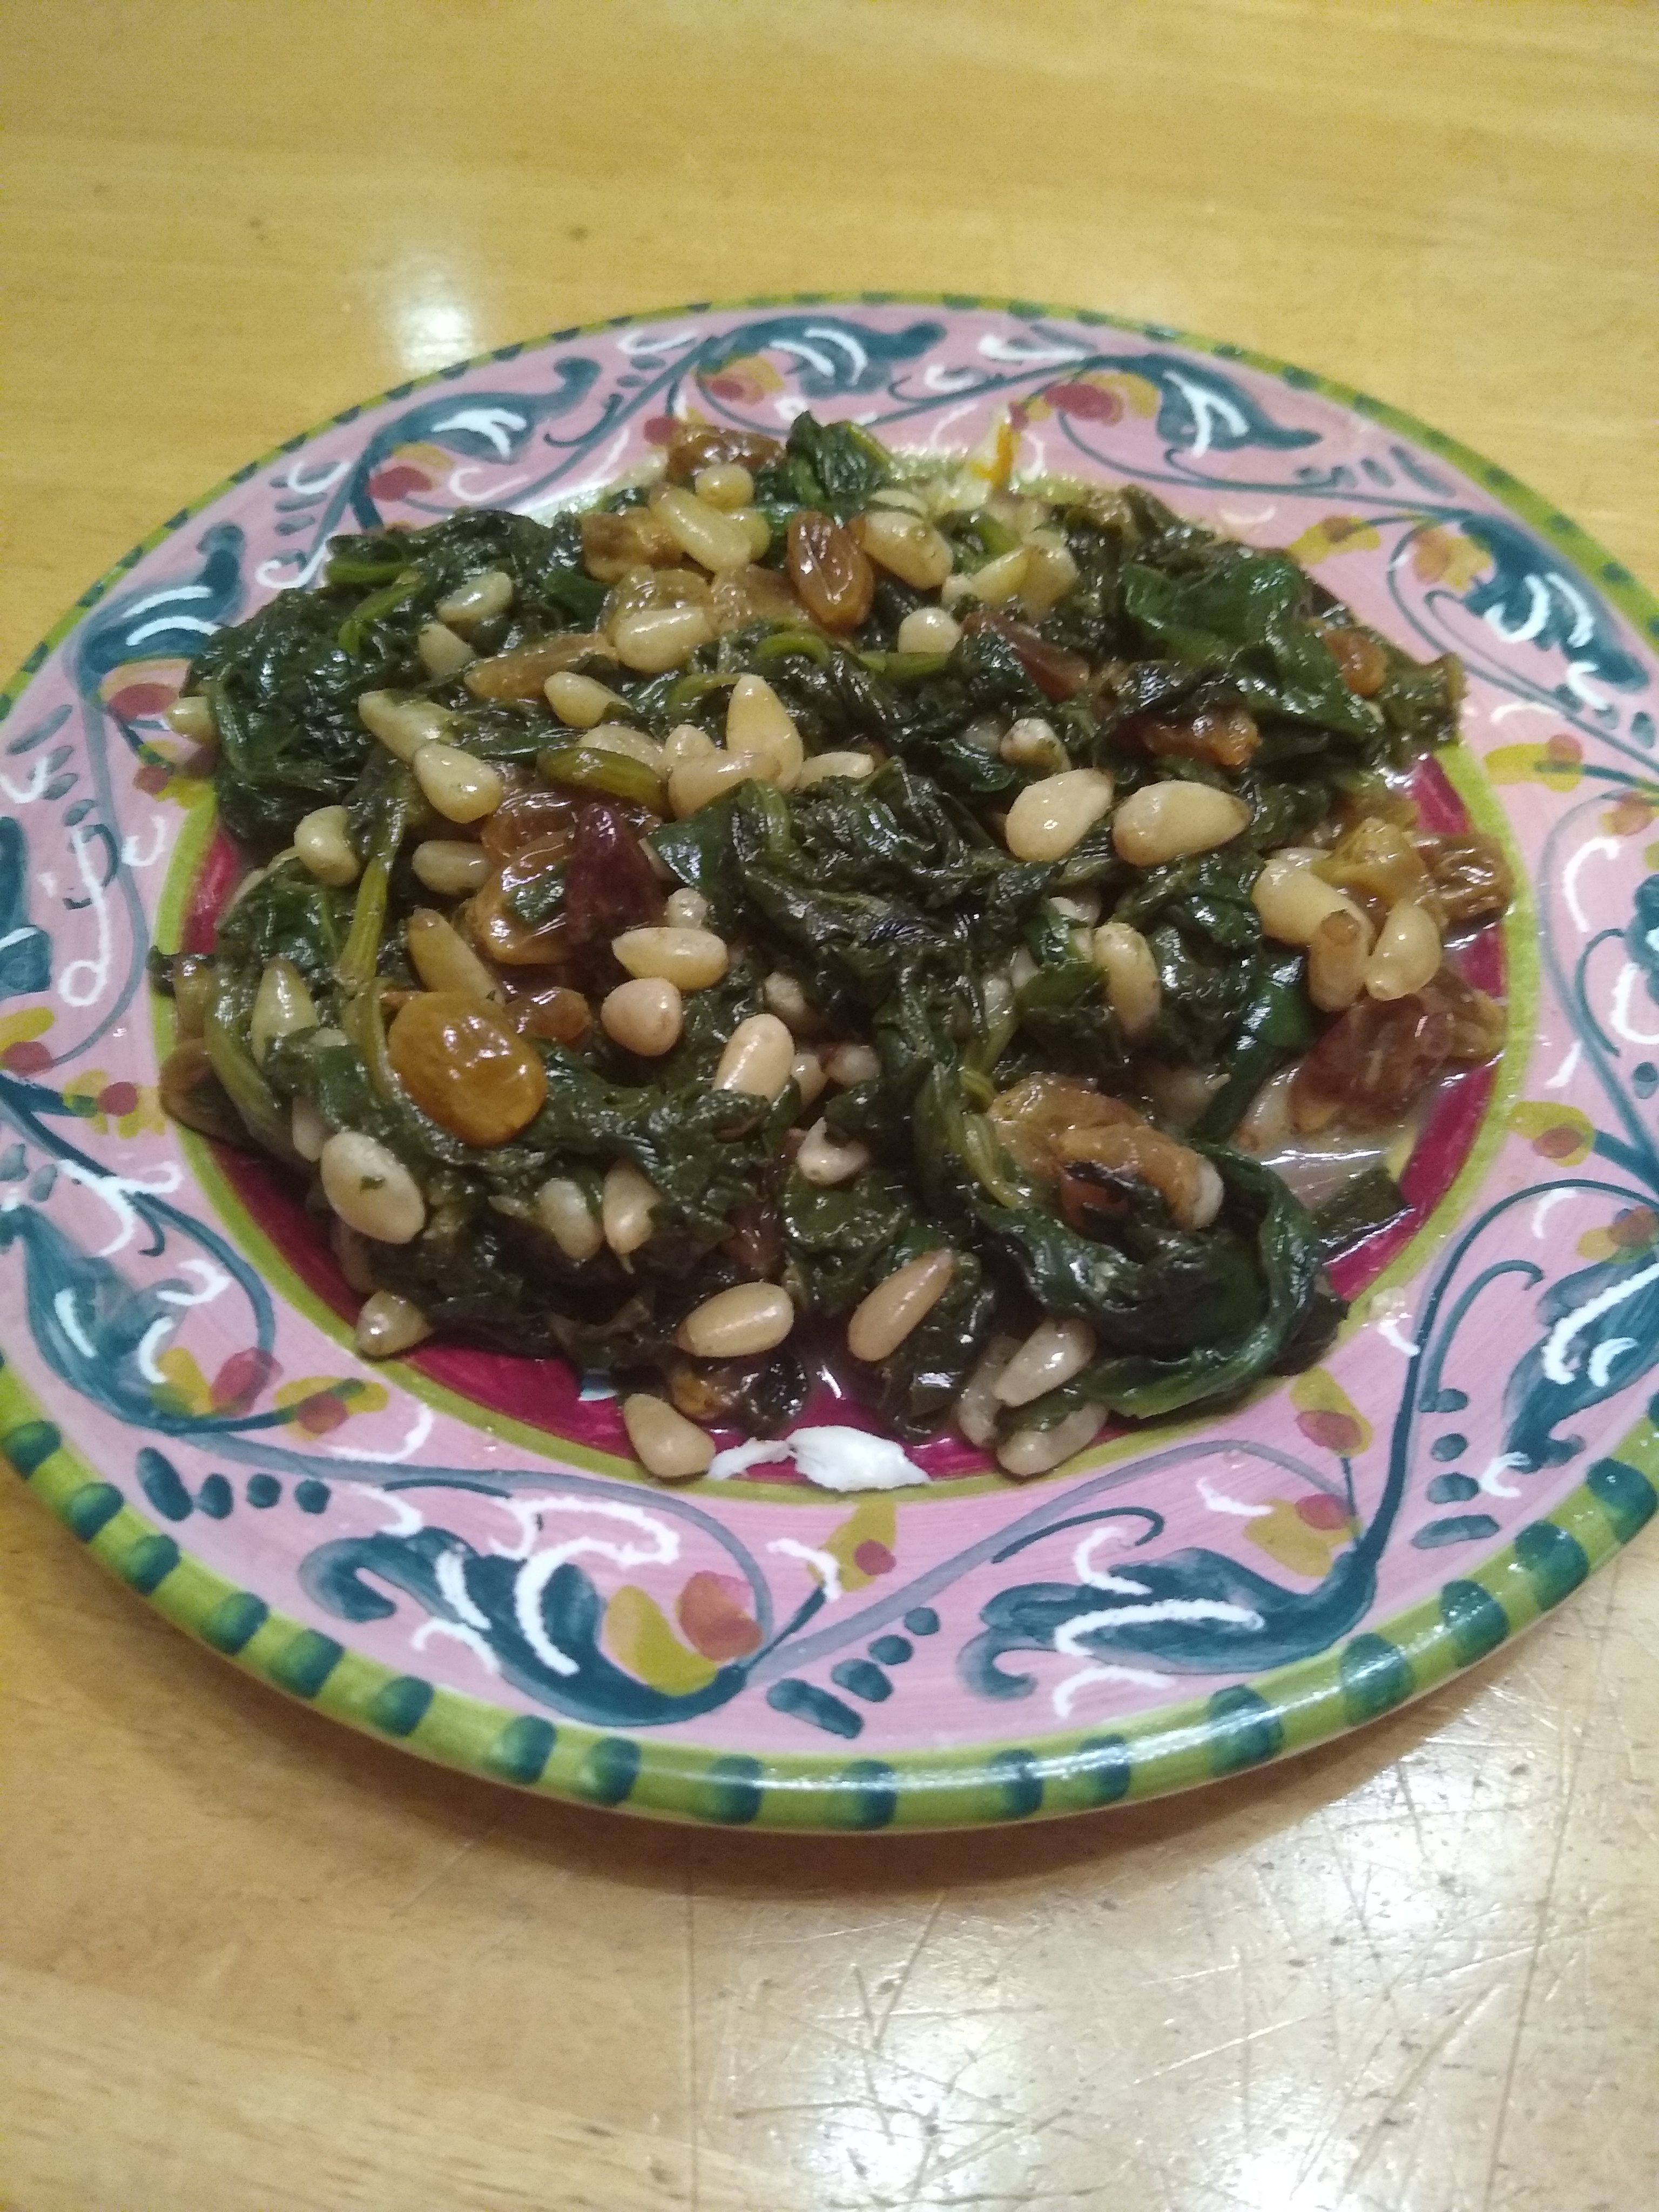 Spinach in the Genoese style